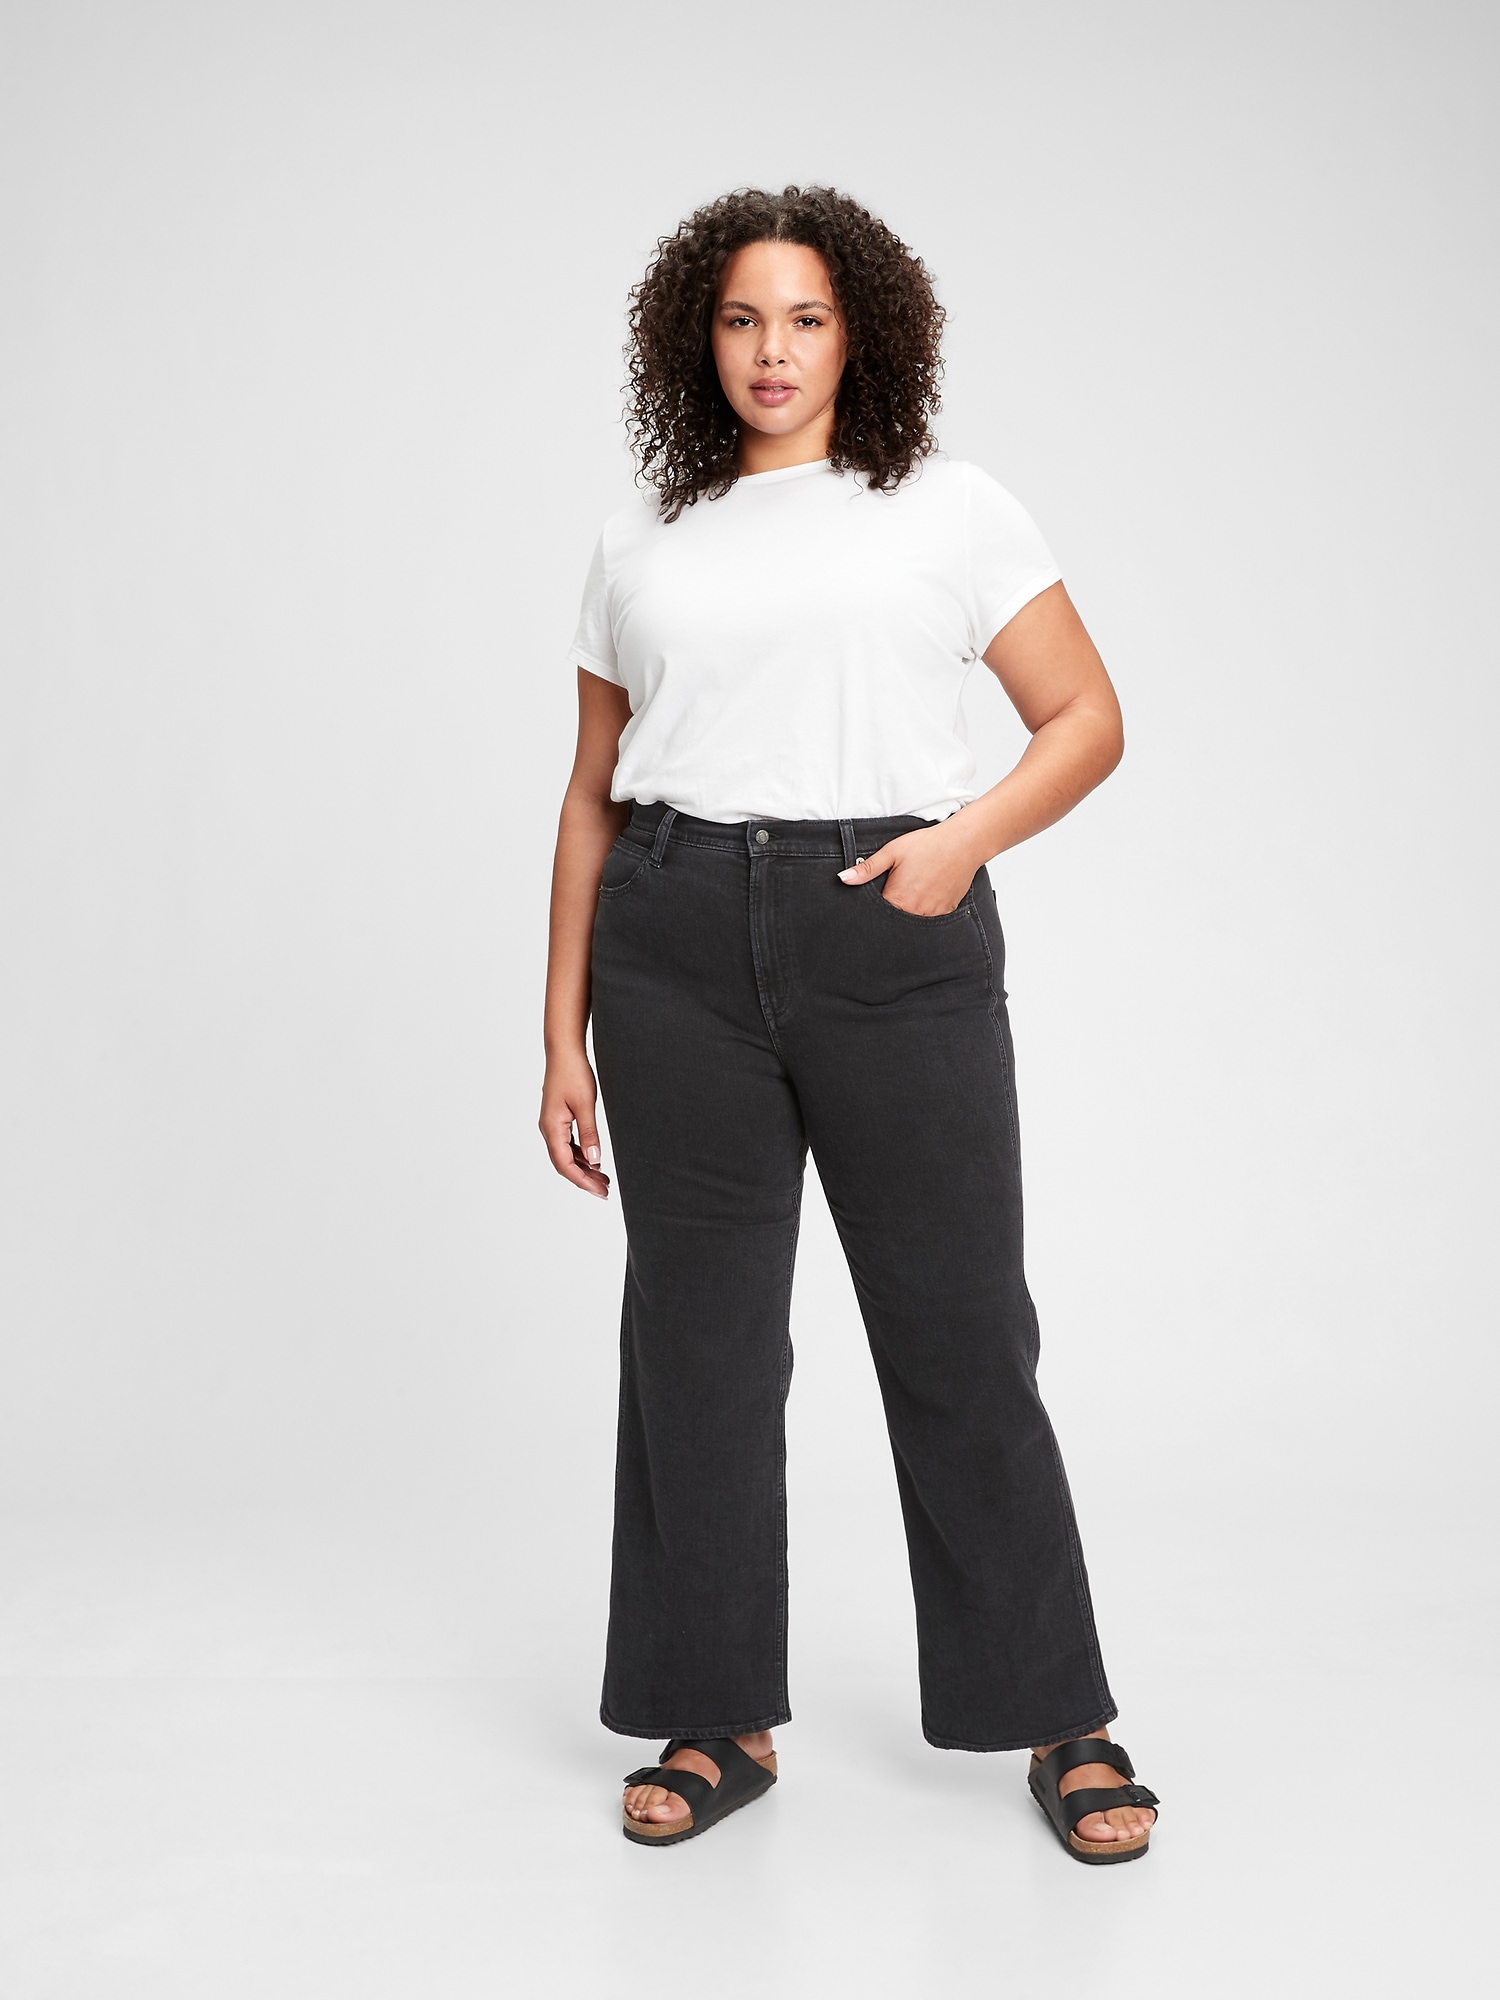 A Light-Wash Jean: Gap High Rise Vintage Flare Jeans, Yes, Flare Jeans Are  Back, but This Time, They've Got an Edge